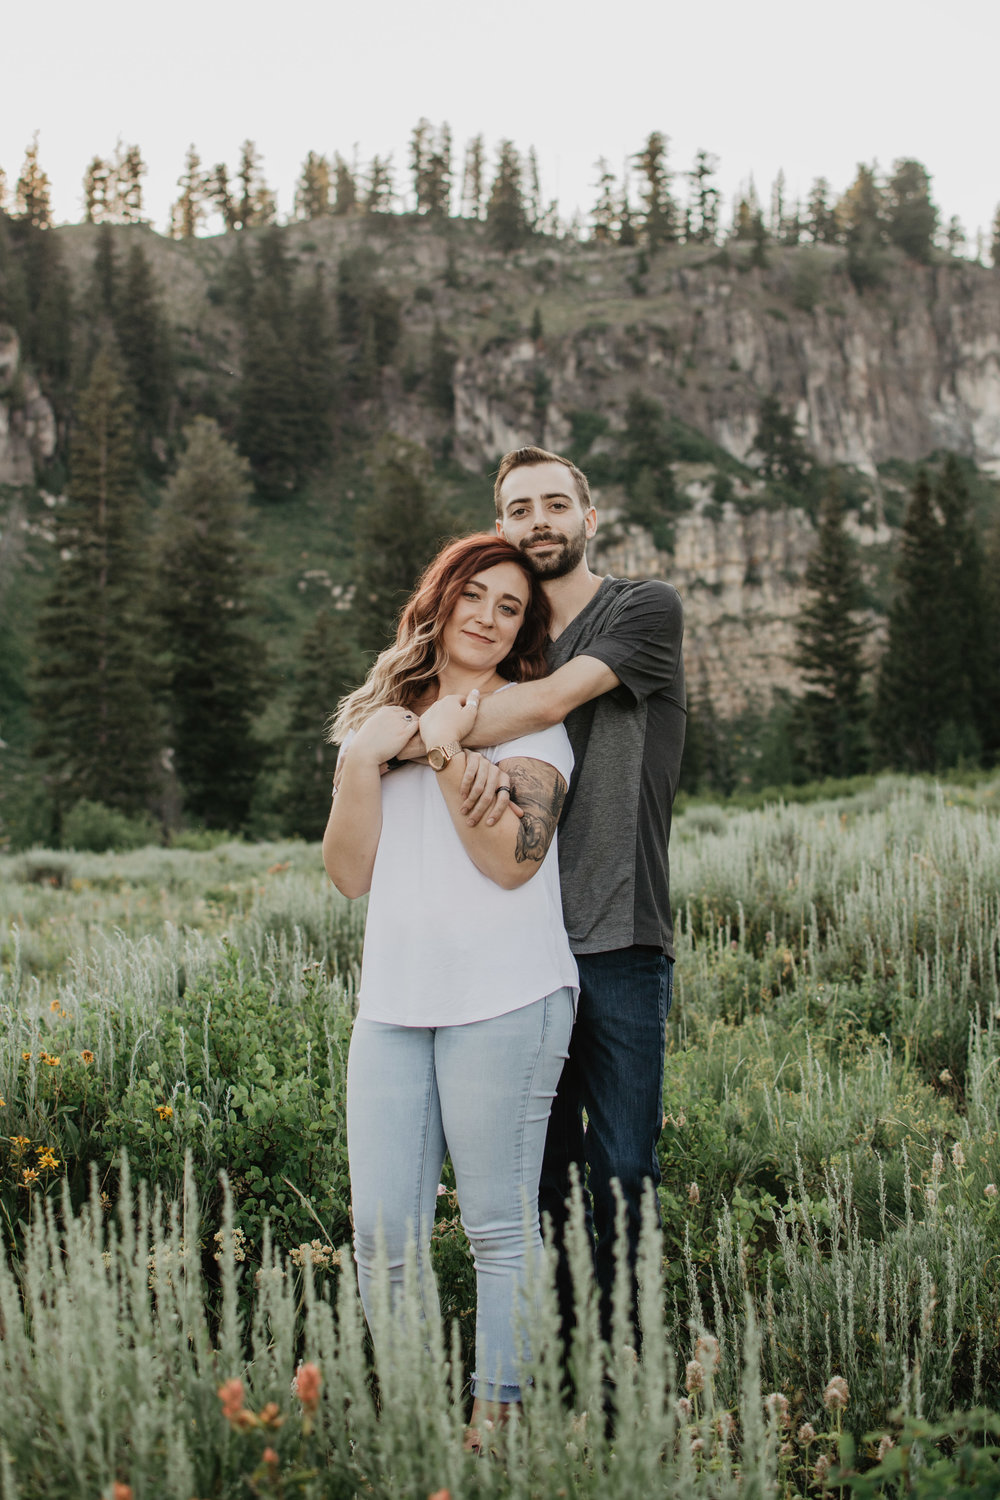 Jocilyn Bennett Photography | Engagement Pose Ideas | Destination Wedding Photographer | Elopement Wedding Photographer | National Park Elopement Photography | Capturing raw and genuine emotion | Utah Photographer | Utah wedding Photographer | National Park Weddings | Outfit ideas for engagements | Engagements with wild flowers| Adventure Photographer | What to wear guide for engagement | Mountain engagements | Location ideas for engagements | Logan Canyon, Utah | Tony Grove Lake |